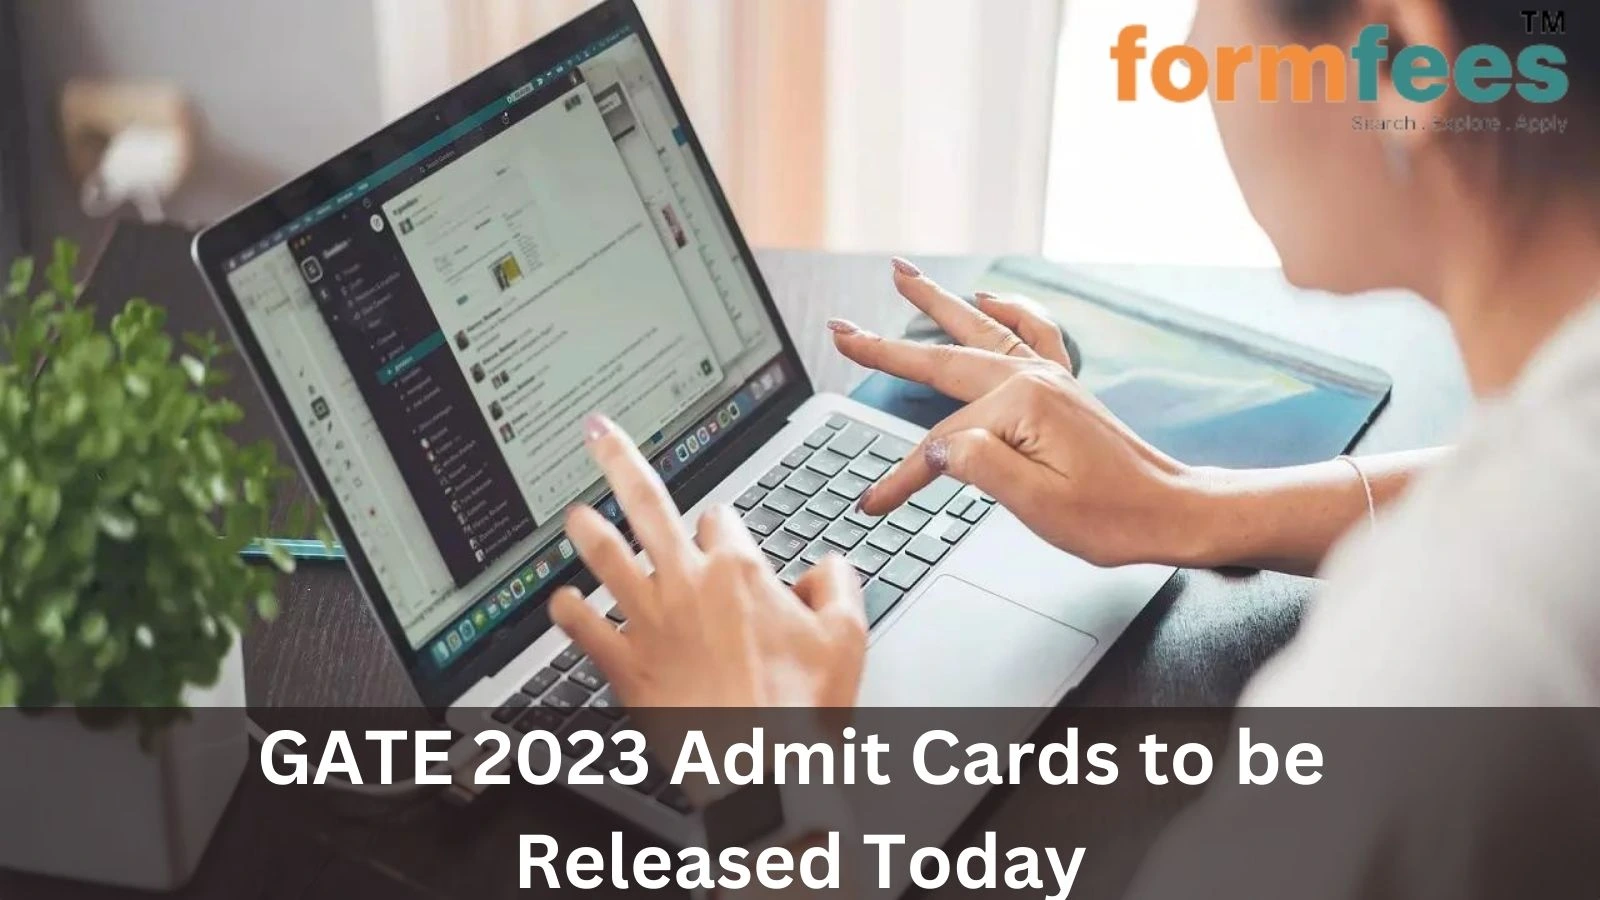 GATE 2023 Admit Cards to be Released Today